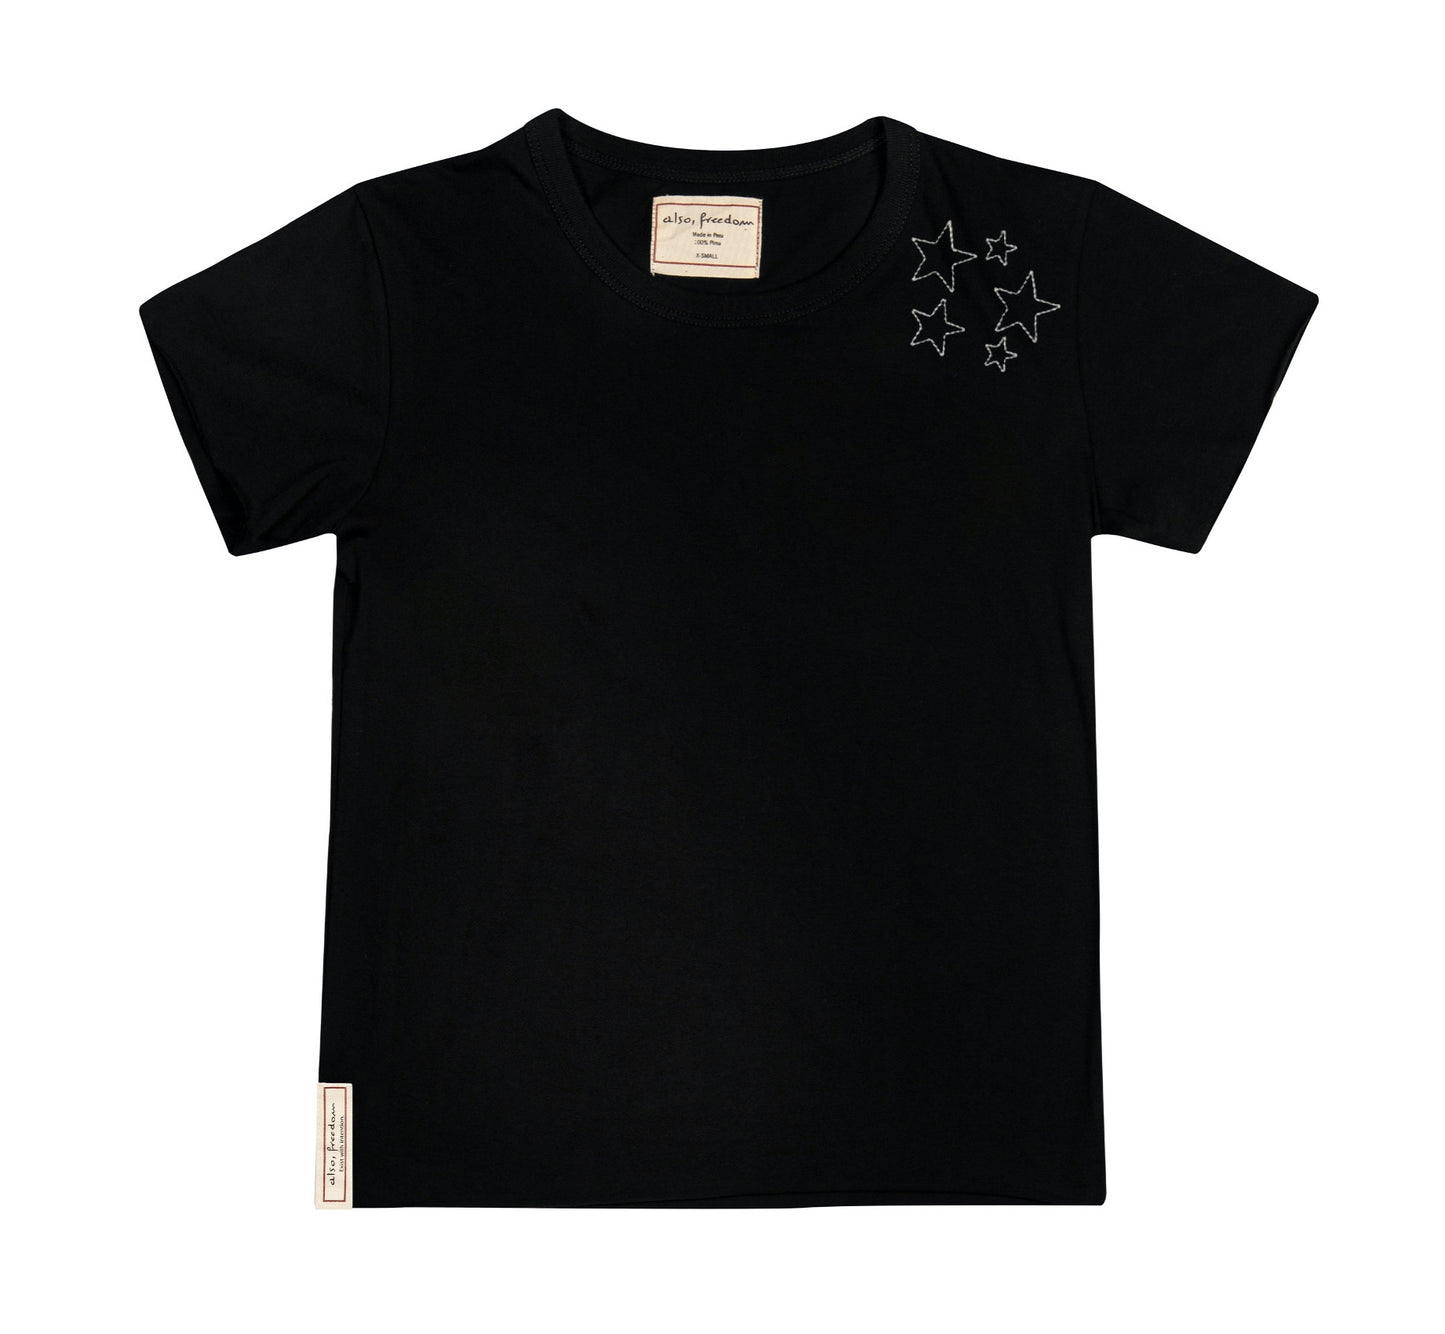 Sprinkle of Courage, Air Tee BLACK - Also, Freedom